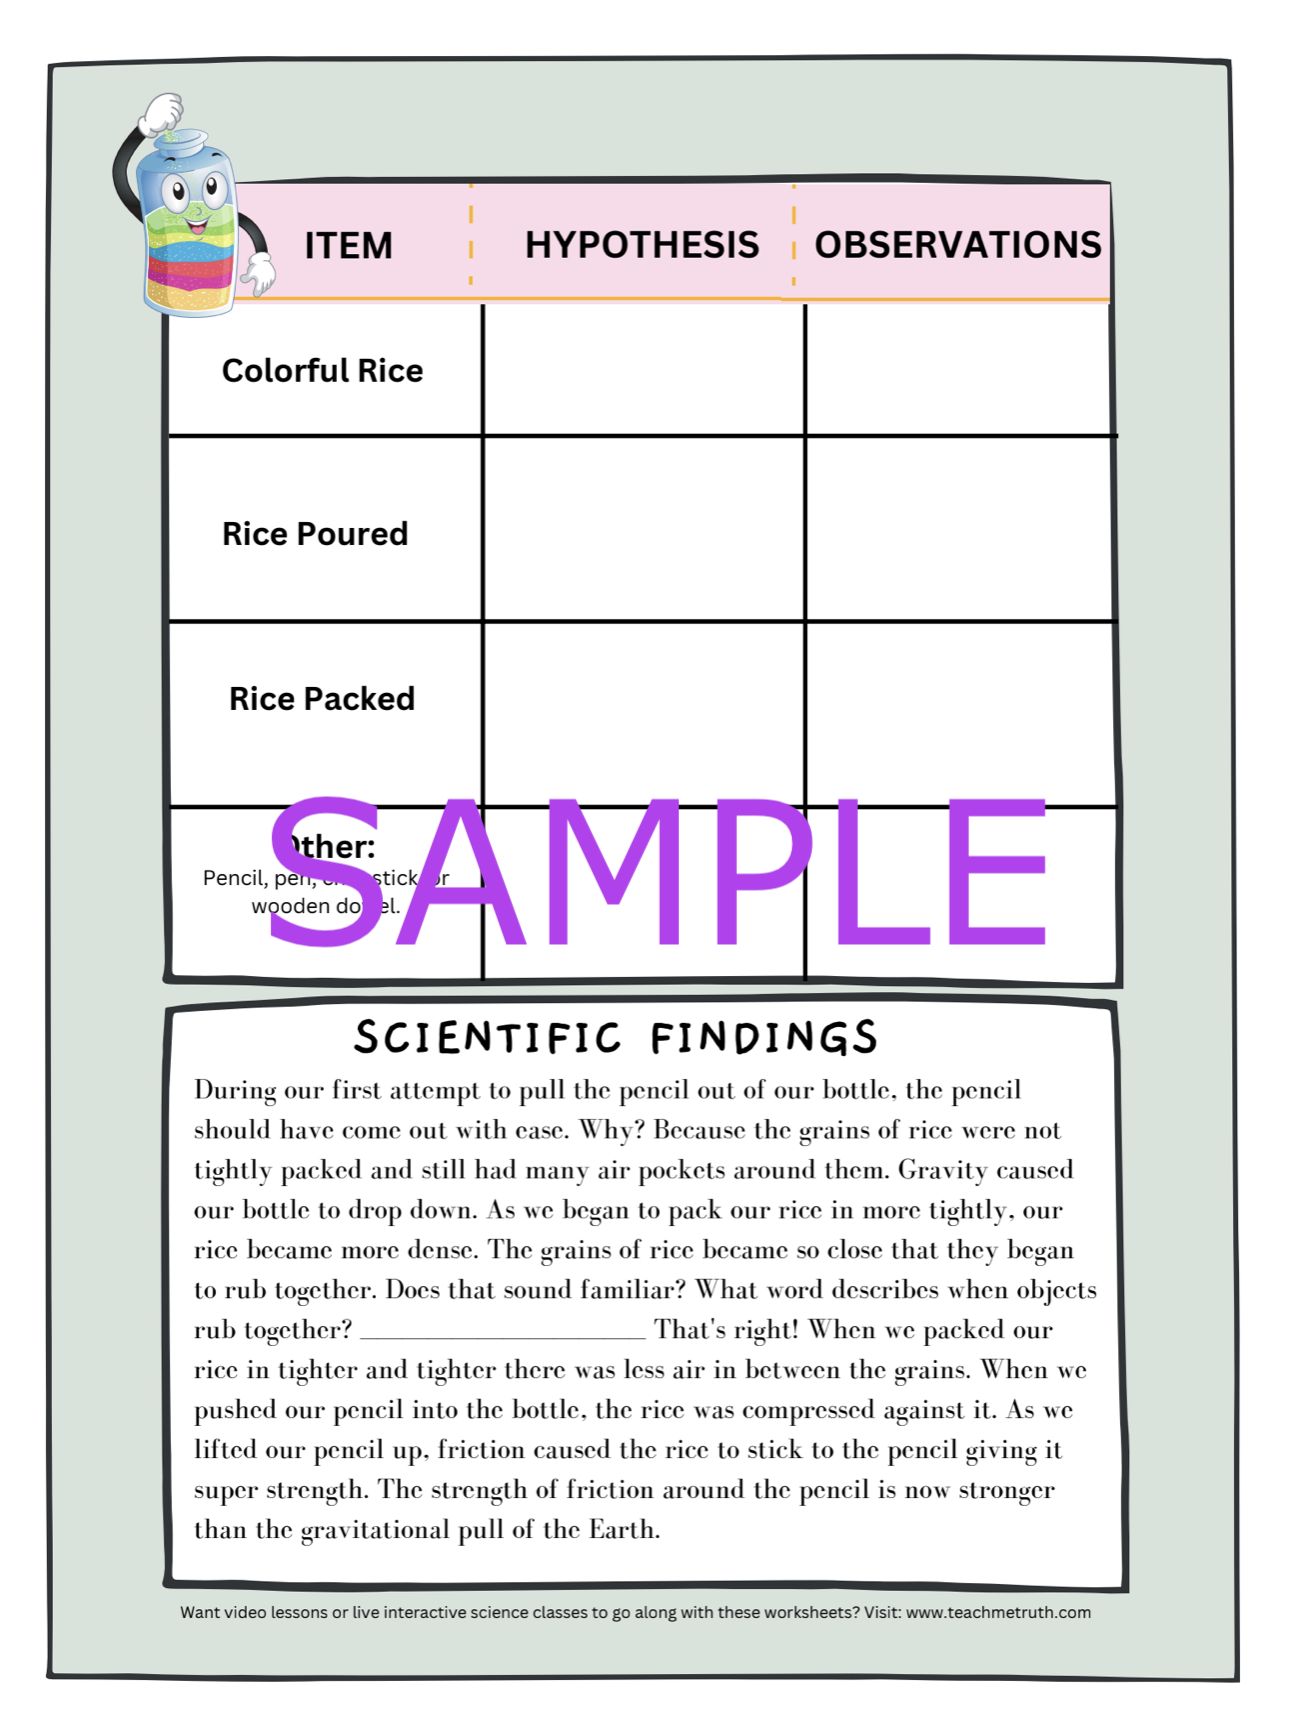 "Friction Rice" Hands-On Science Activity Journal With Instructions